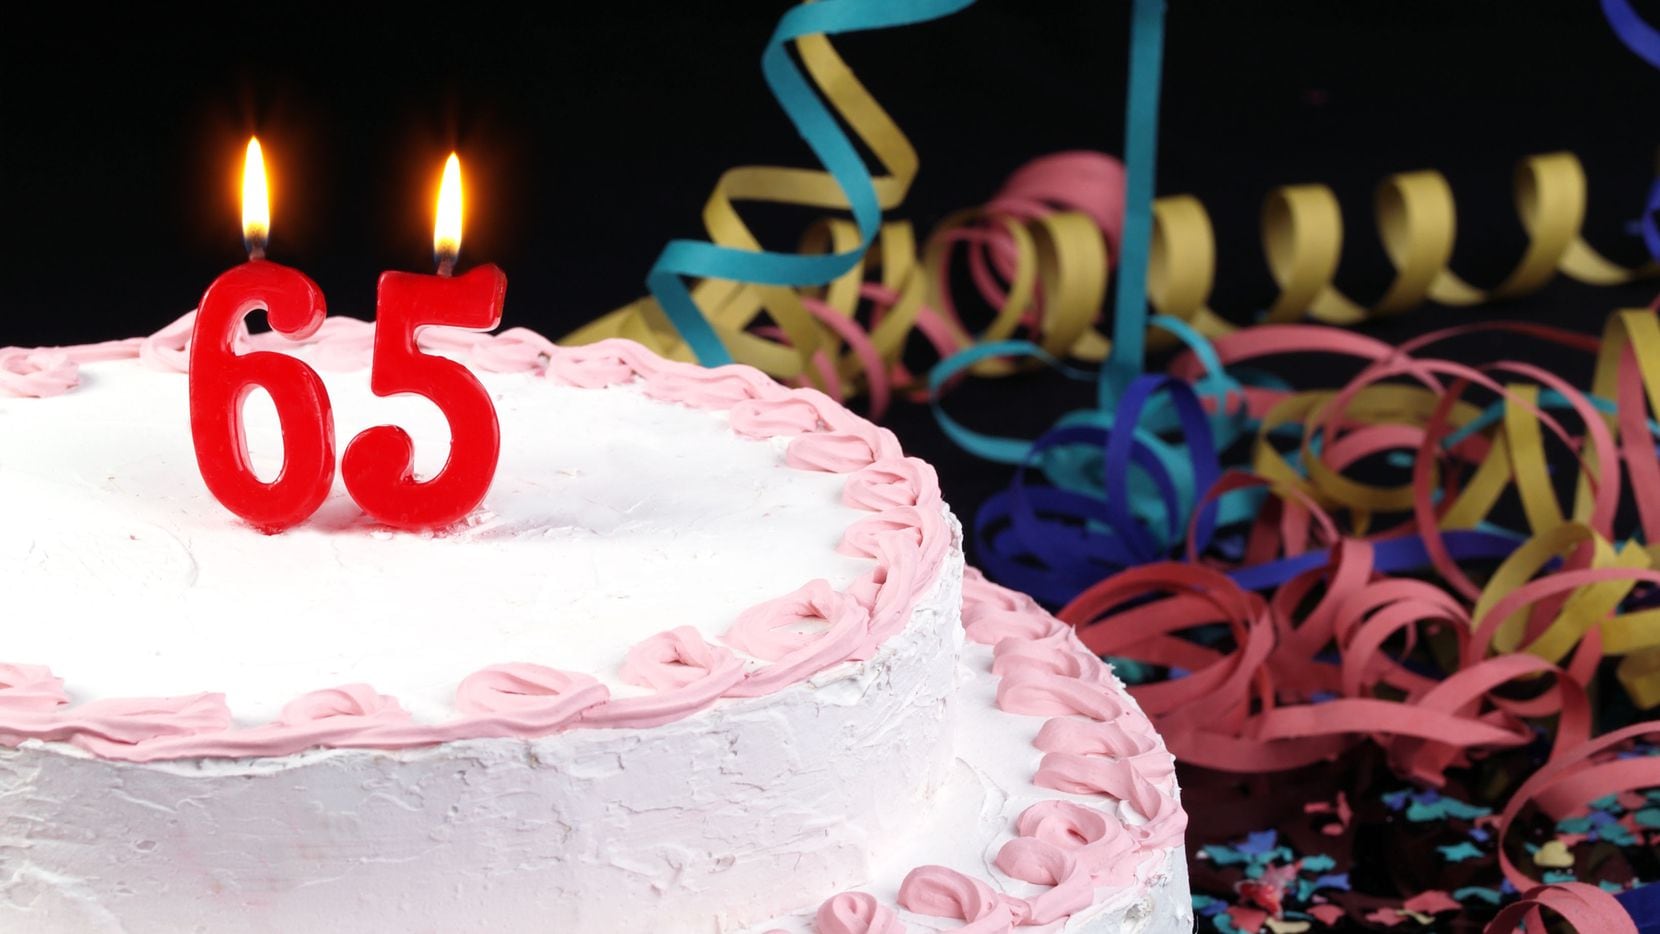 Every day, an average of 10,000 baby boomers reach age 65. After cake and presents, they've...